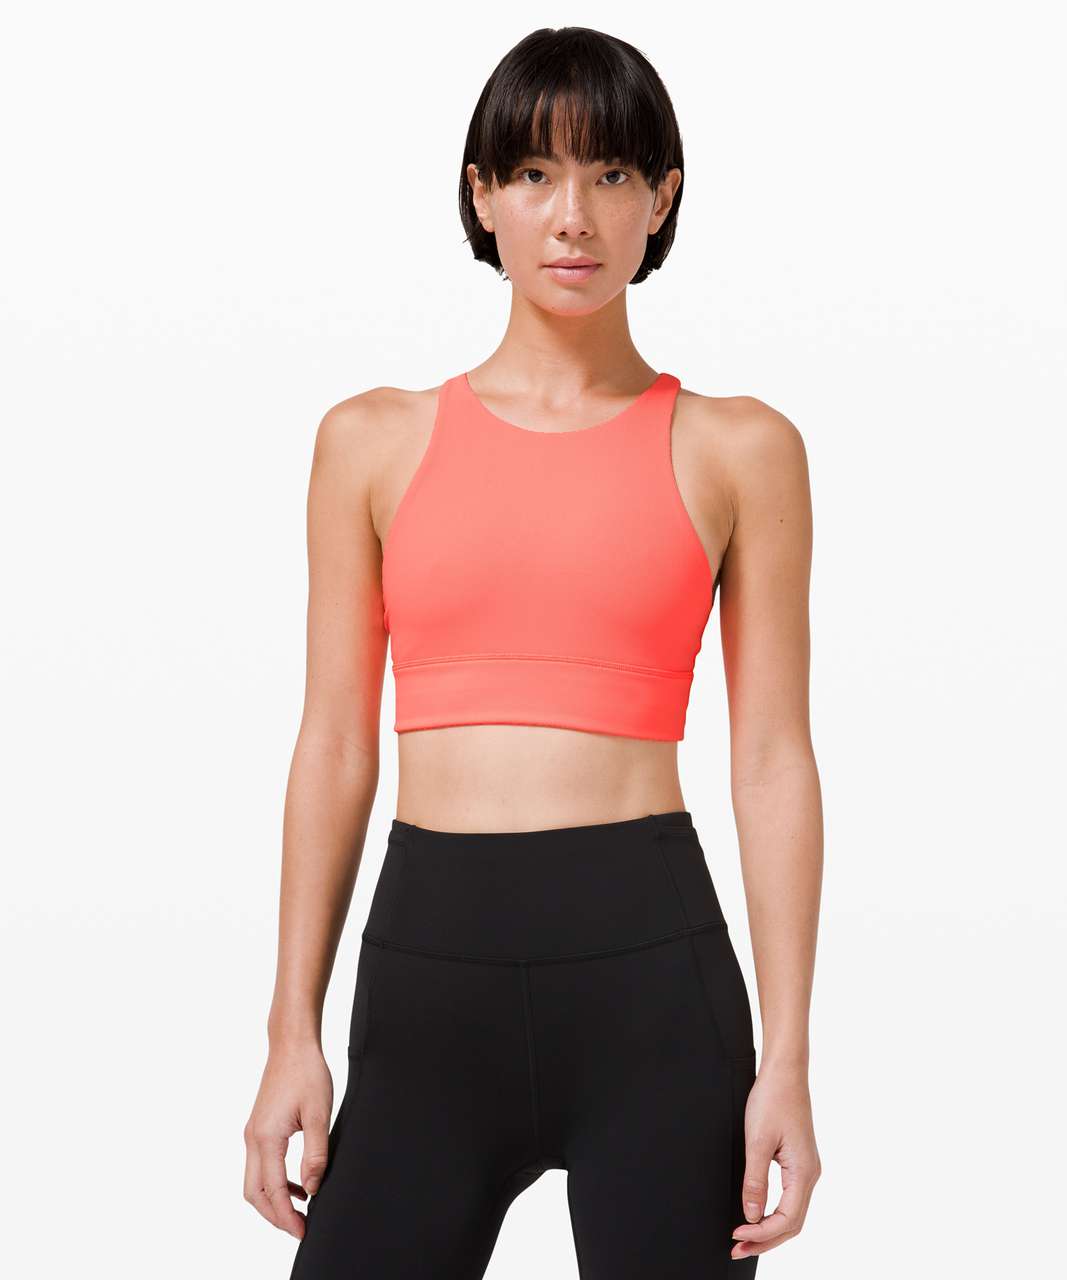 lululemon - Pair this long-line v-neck bra with a pair of high-rise bottoms  for hot yoga classes. Sheer details along the neckline and underband give  you extra airflow. Meet the Find Focus